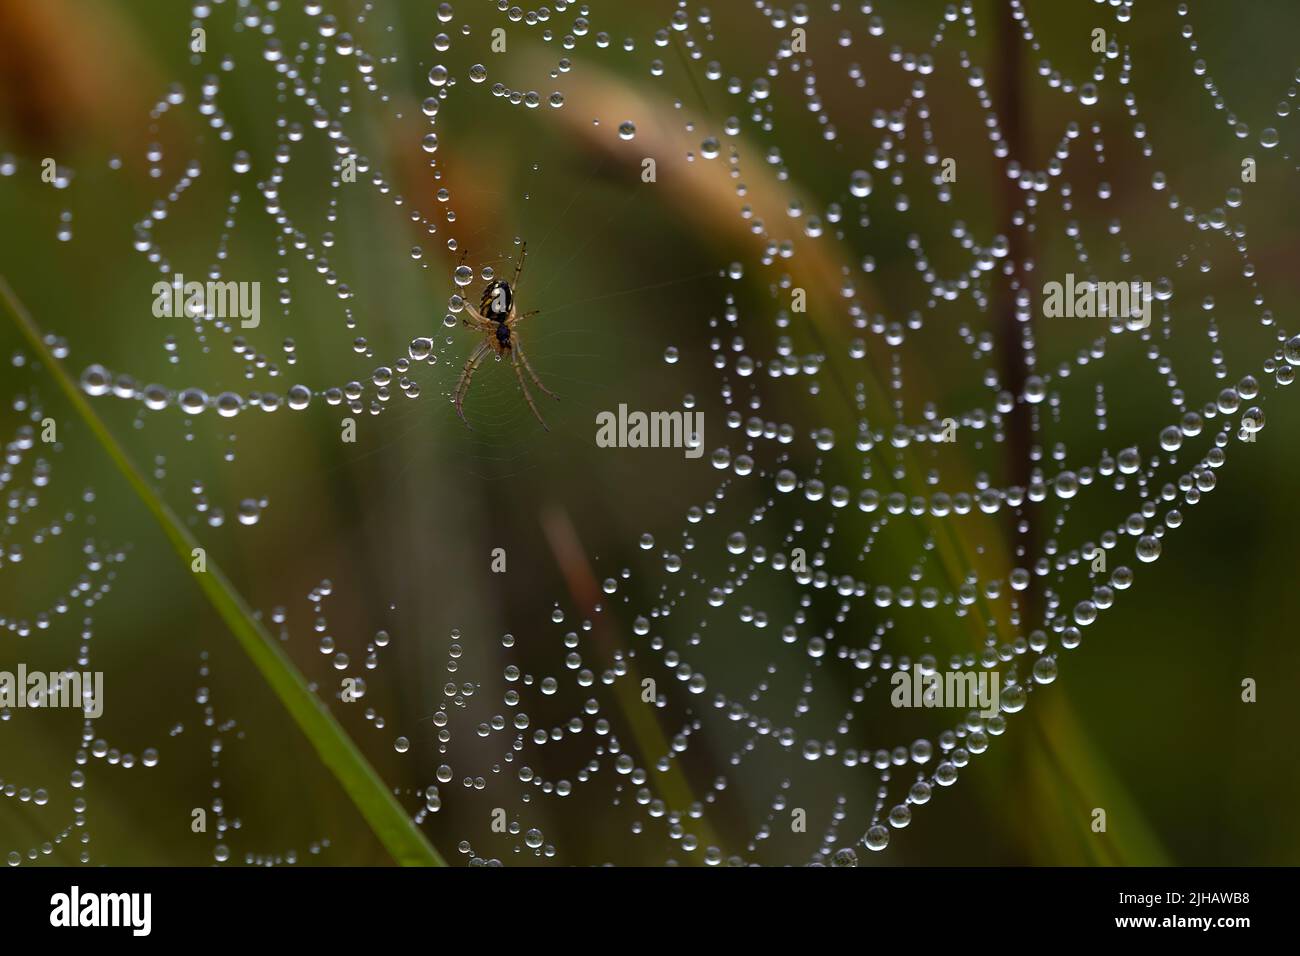 macro nature photography, water drops on a spider's web with its spider in the centre. wild beauty. animal themes Stock Photo